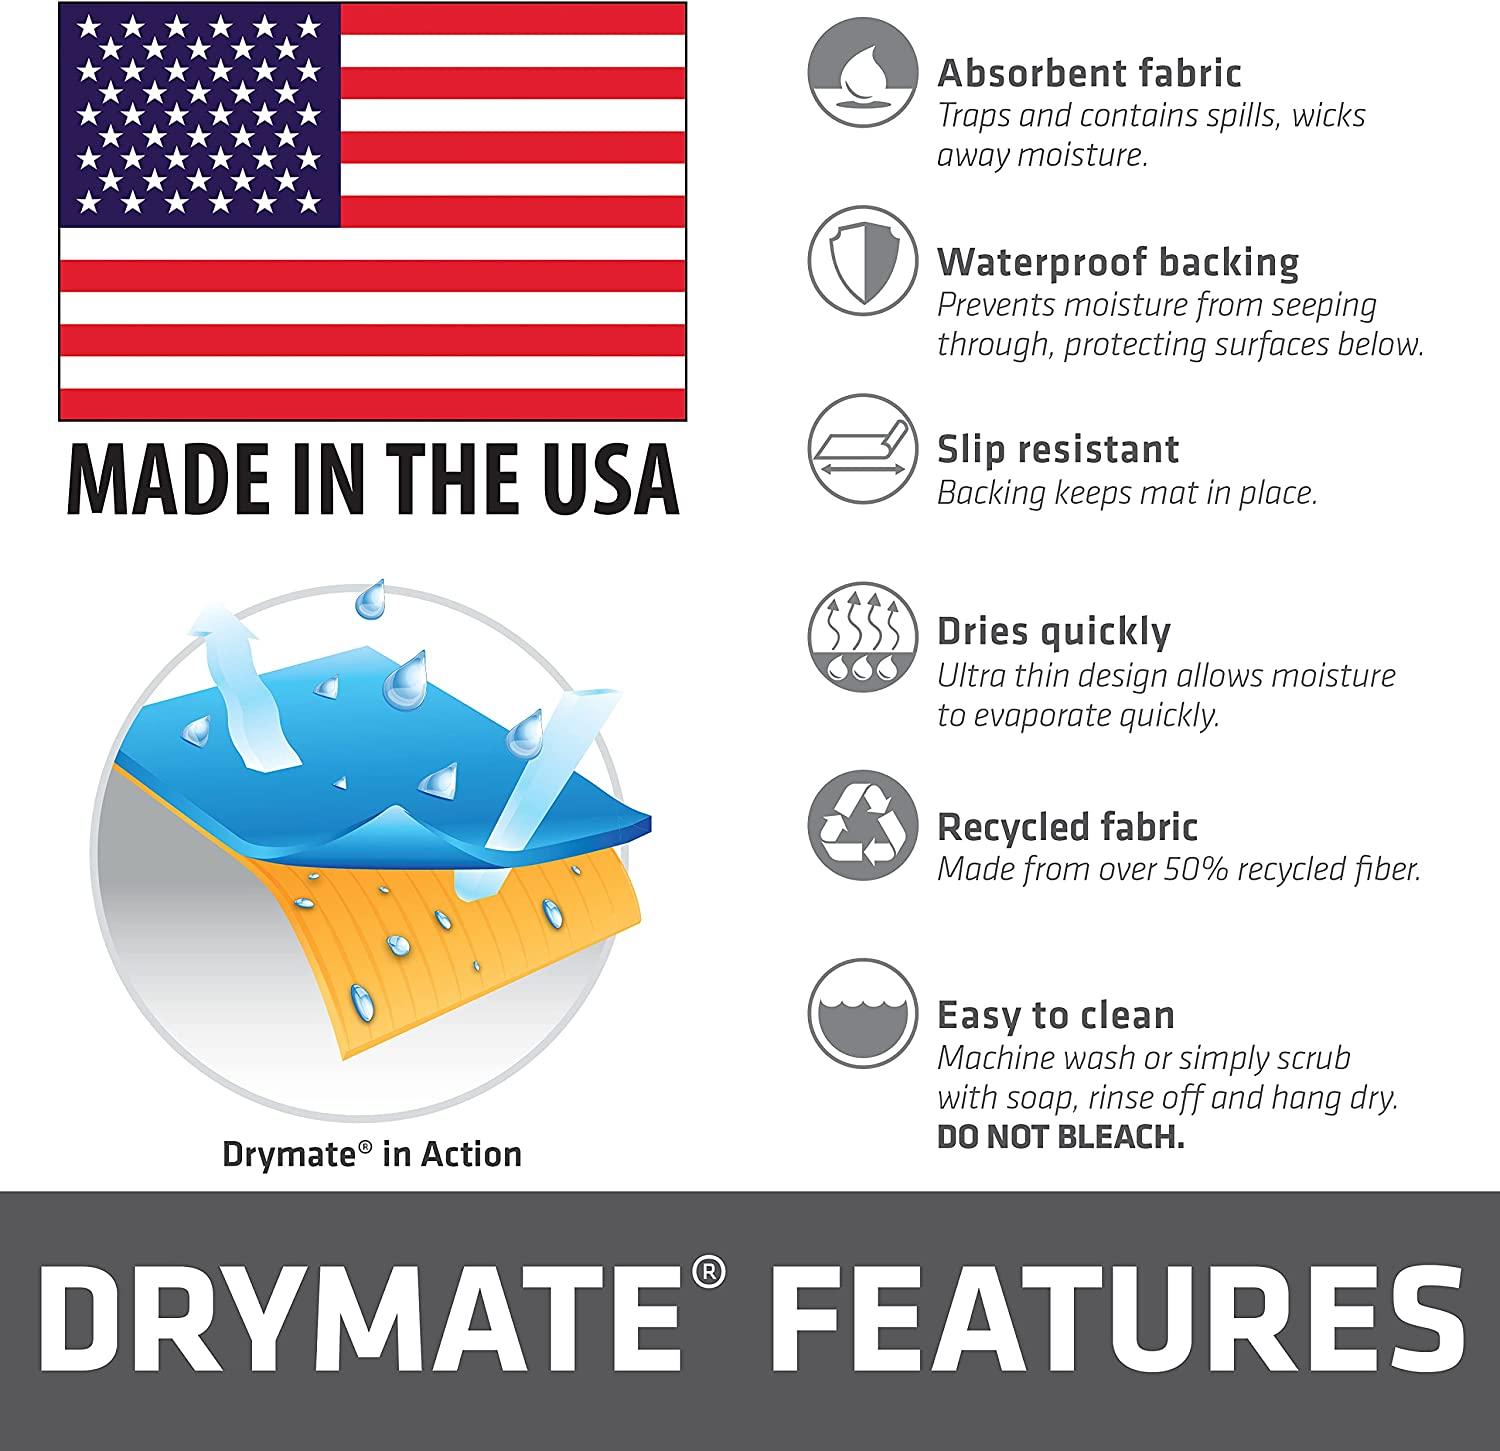 Drymate Premium Dish Drying Mat, XL Size 19 inch x 24 inch , Absorbent Fabric Low-Profile Kitchen Drying Pad - Waterproof - Machine Washable/Durable (